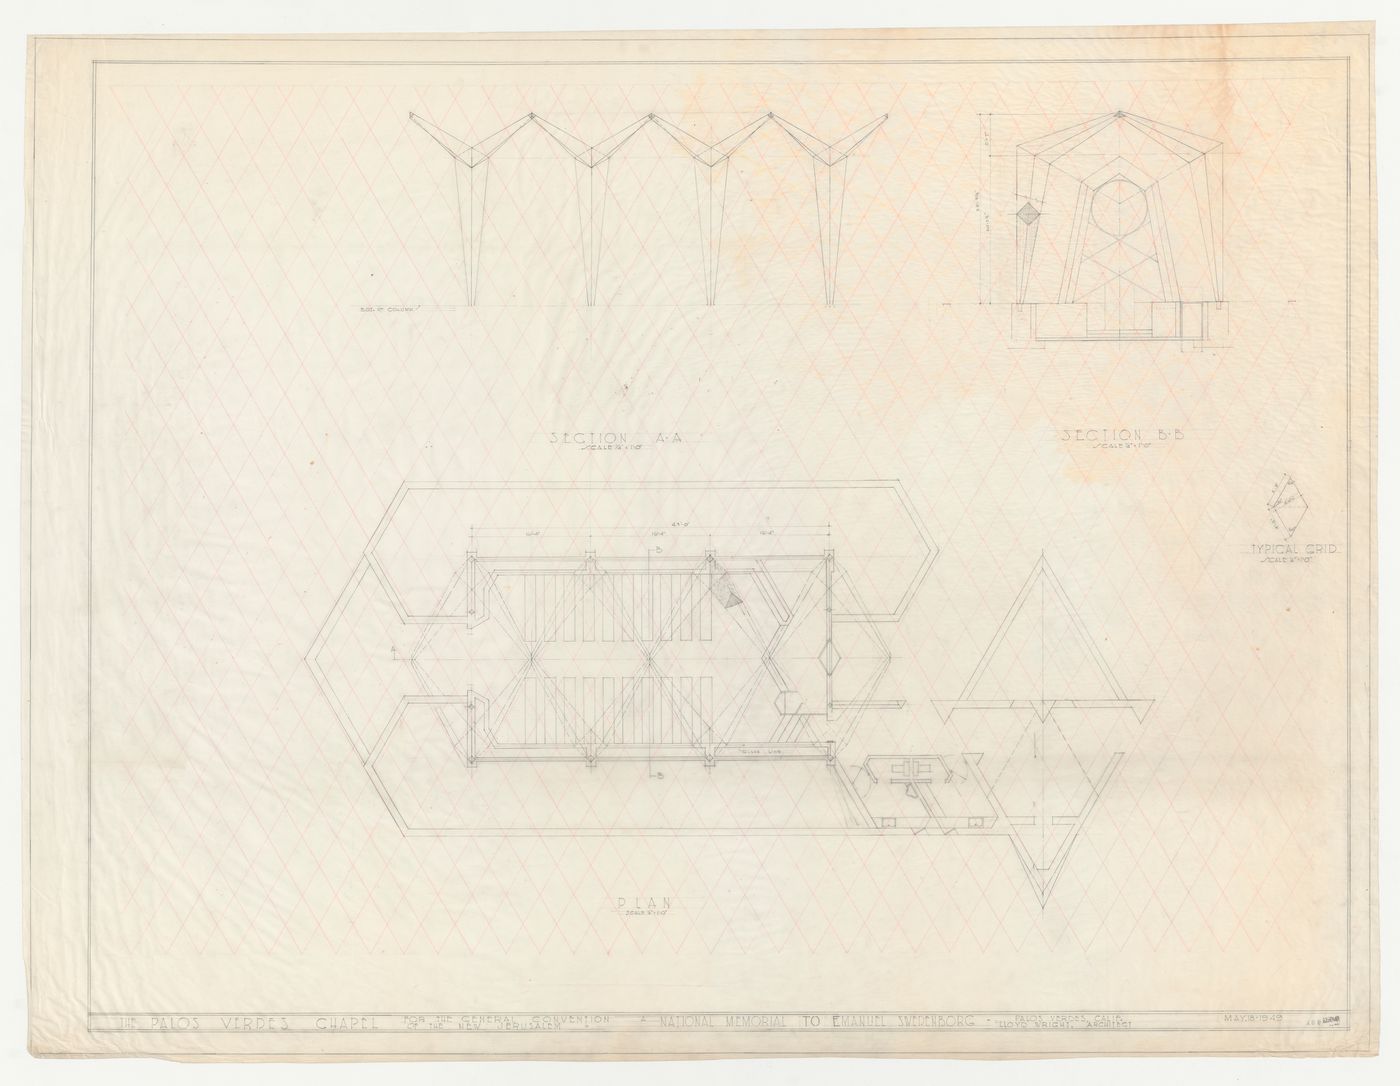 Wayfarers' Chapel, Palos Verdes, California: Plan for chapel and campanile and two sections through the chapel developed on an equilateral parallelogram grid